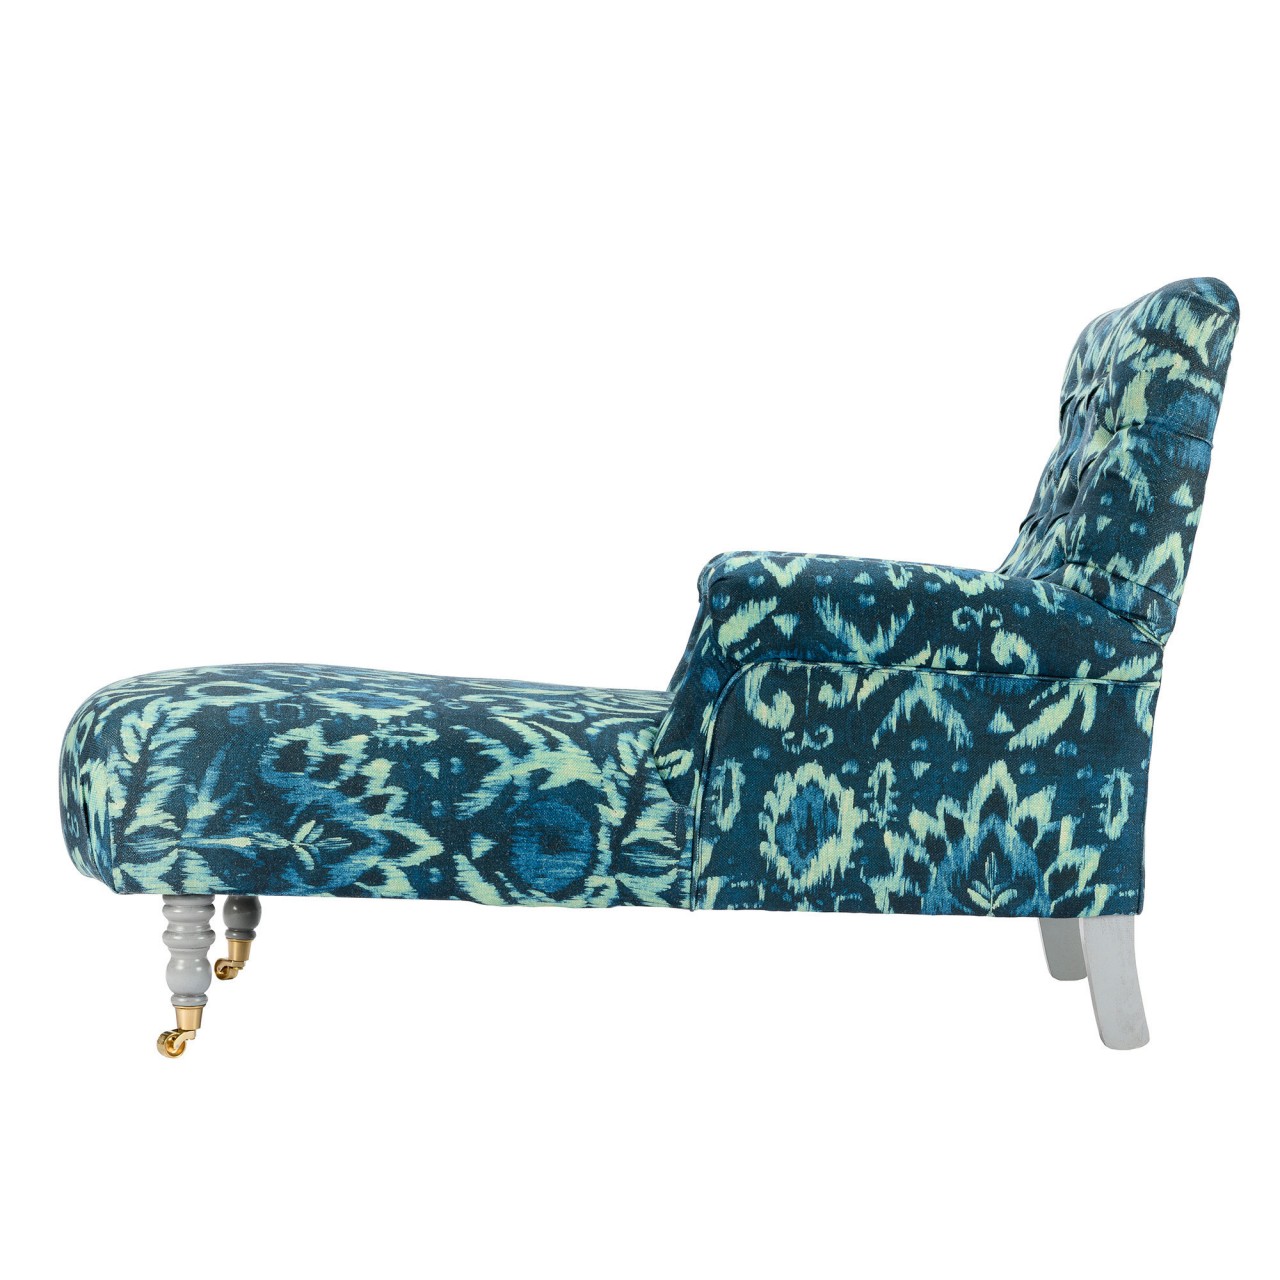 MADISON CHAISE - IONIAN Linen